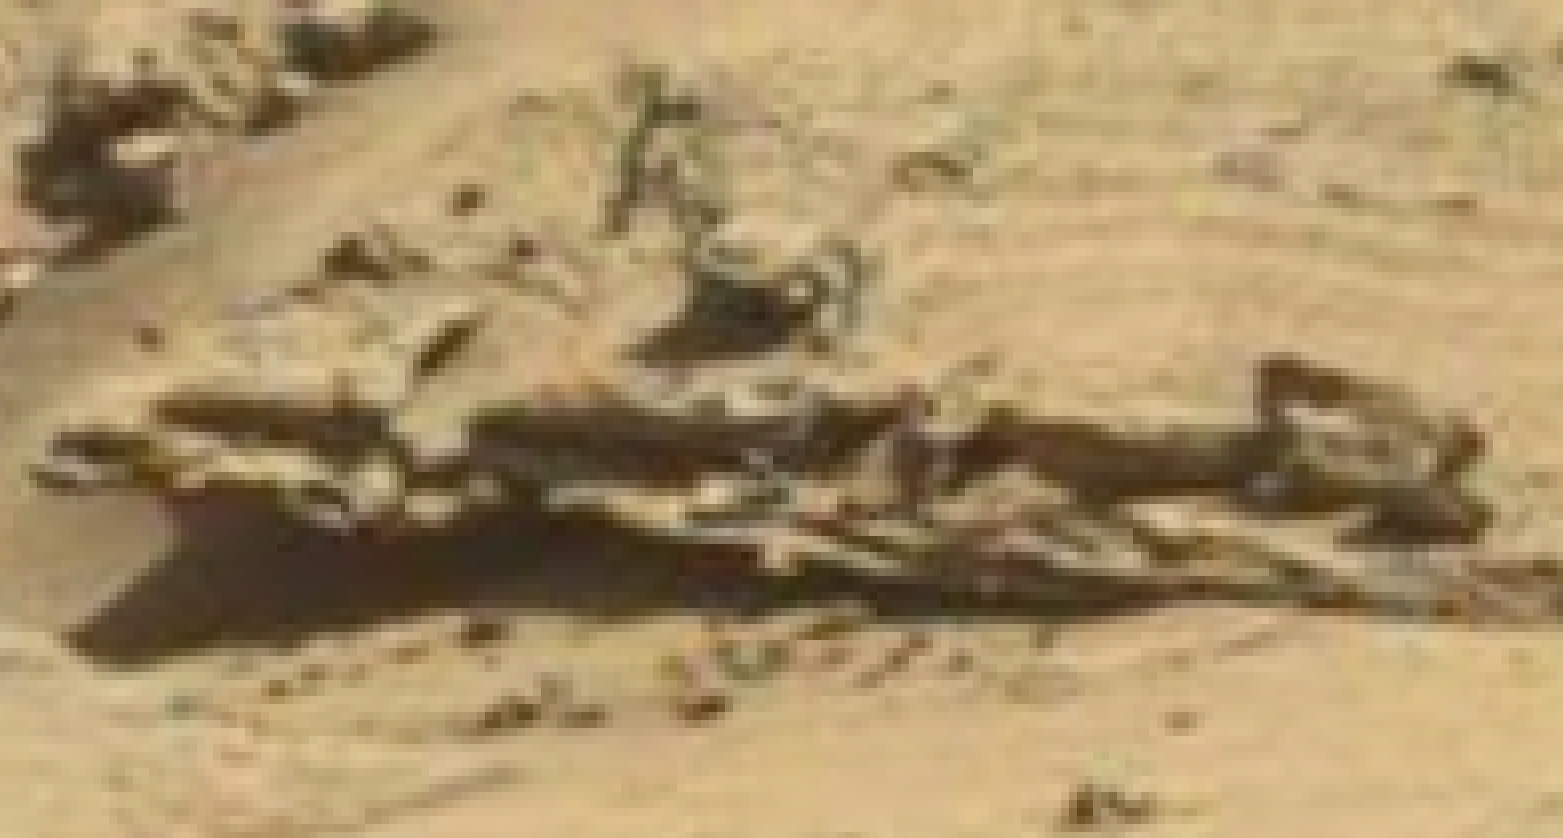 mars sol 1298 anomaly-artifacts 8a was life on mars